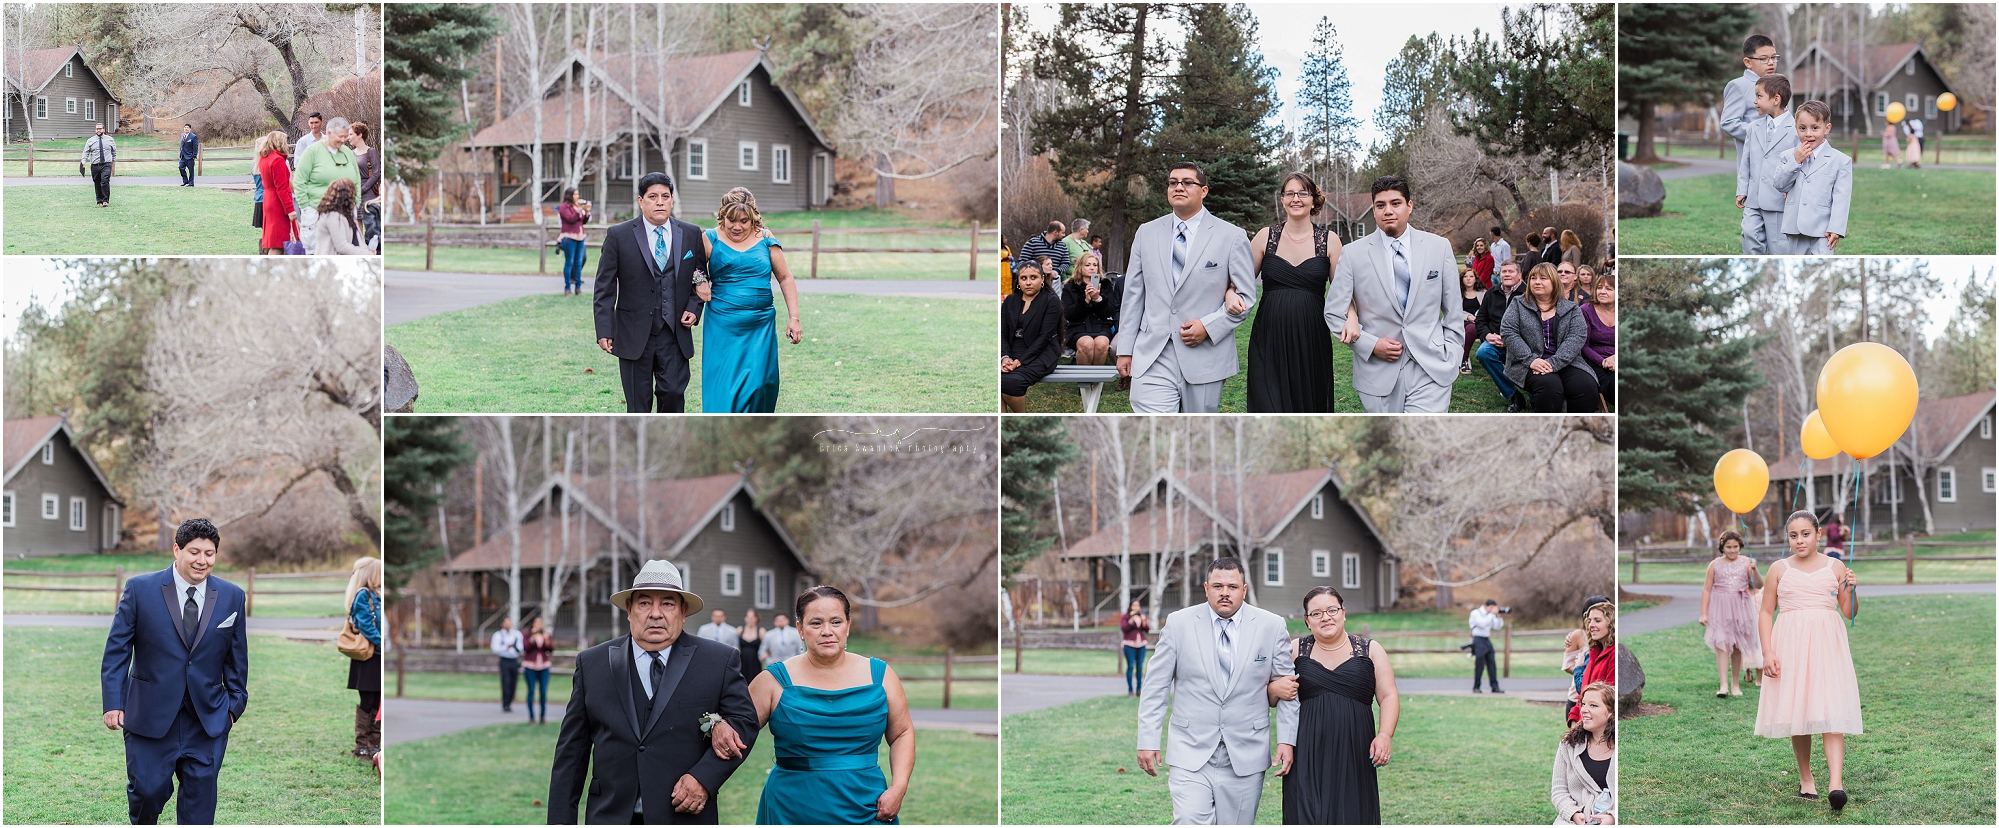 A beautiful wedding processional with family members walking down the grass in this aspen hall outdoor Oregon wedding. 